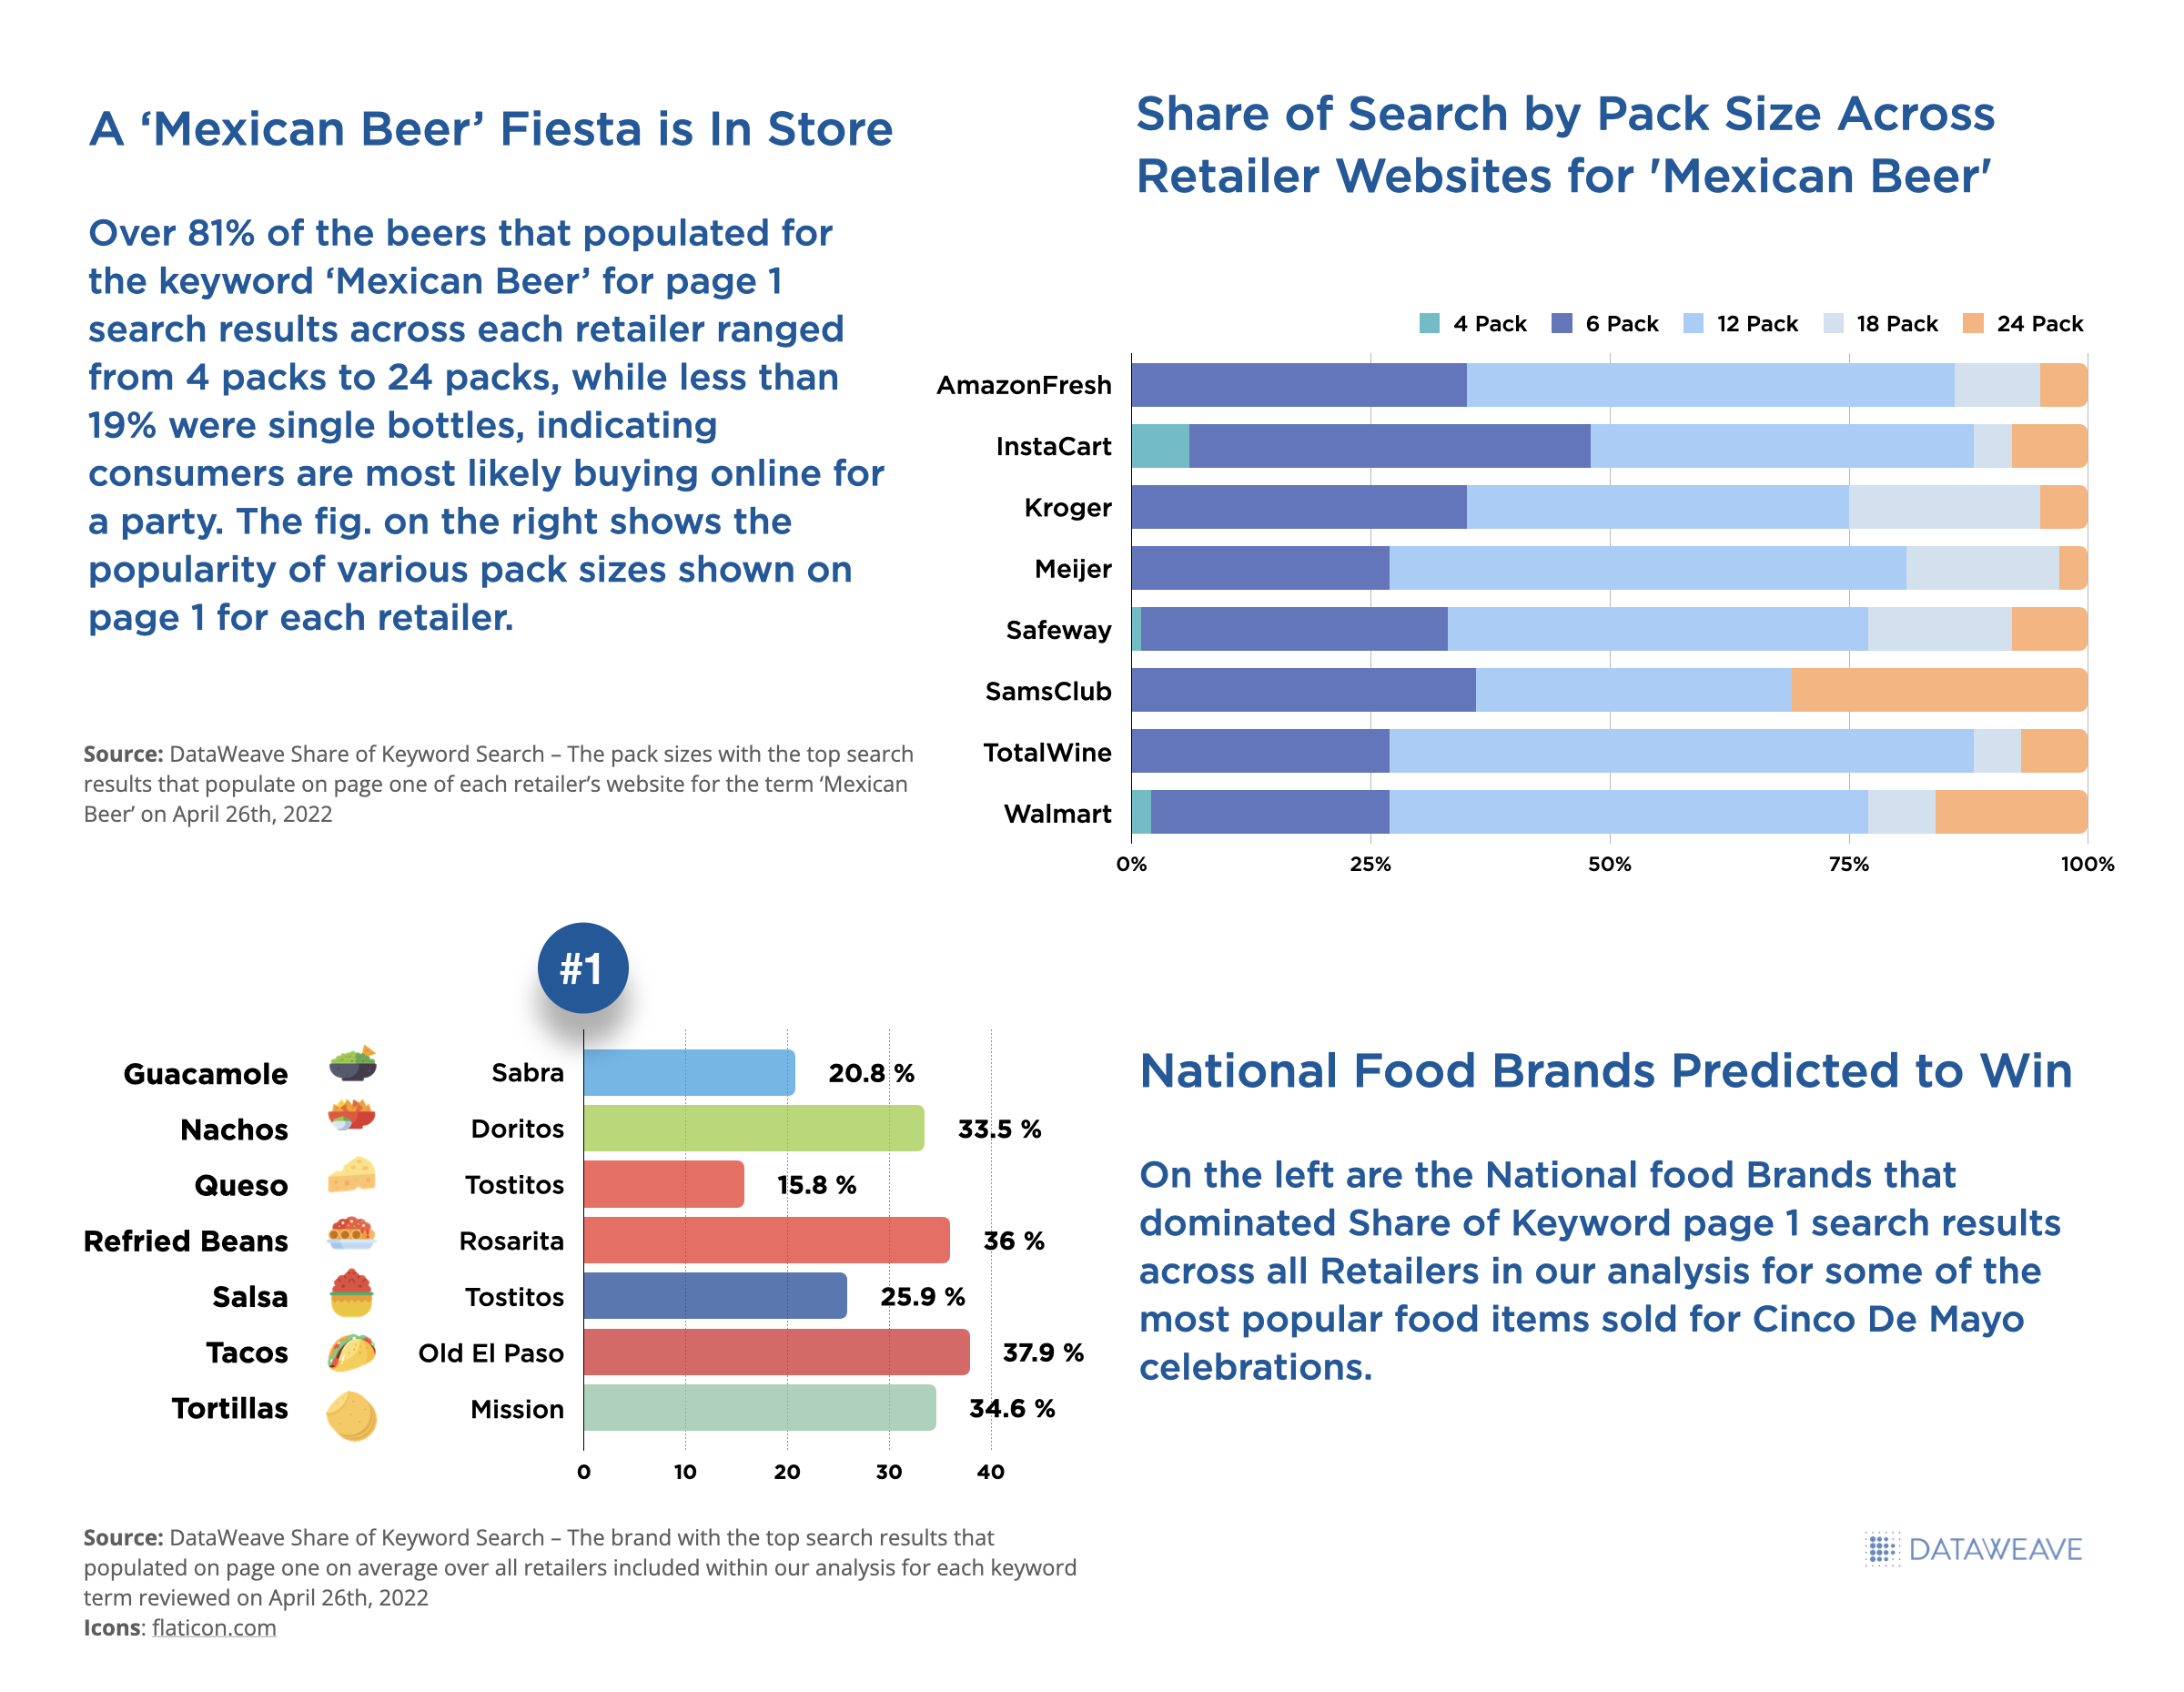 Brands Achieving Top Share of Search for Food and Beverage Categories on Cinco de Mayo 2022